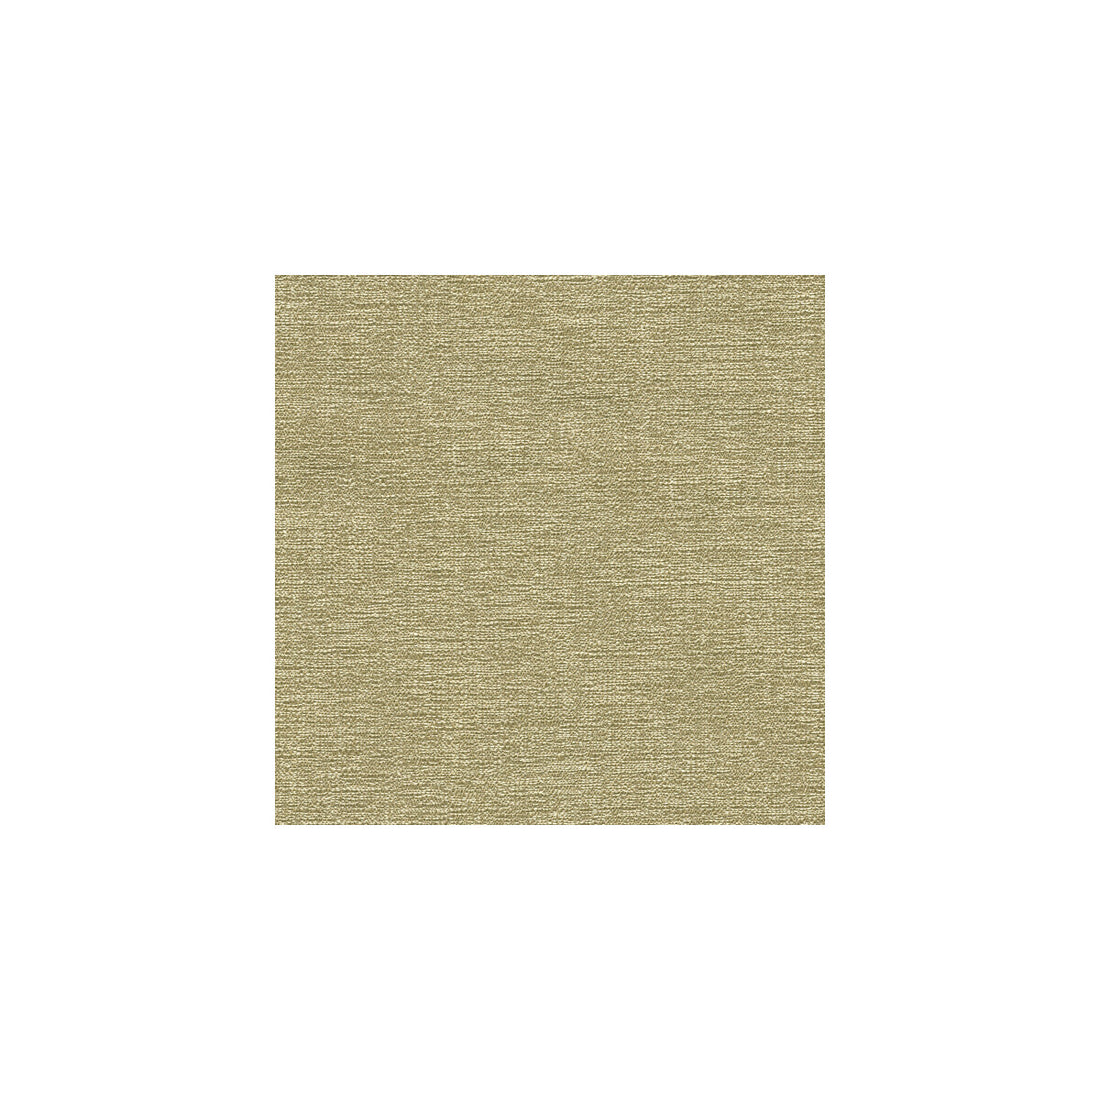 Sharlee fabric in golden kiss color - pattern 32490.11.0 - by Kravet Contract in the Candice Olson collection